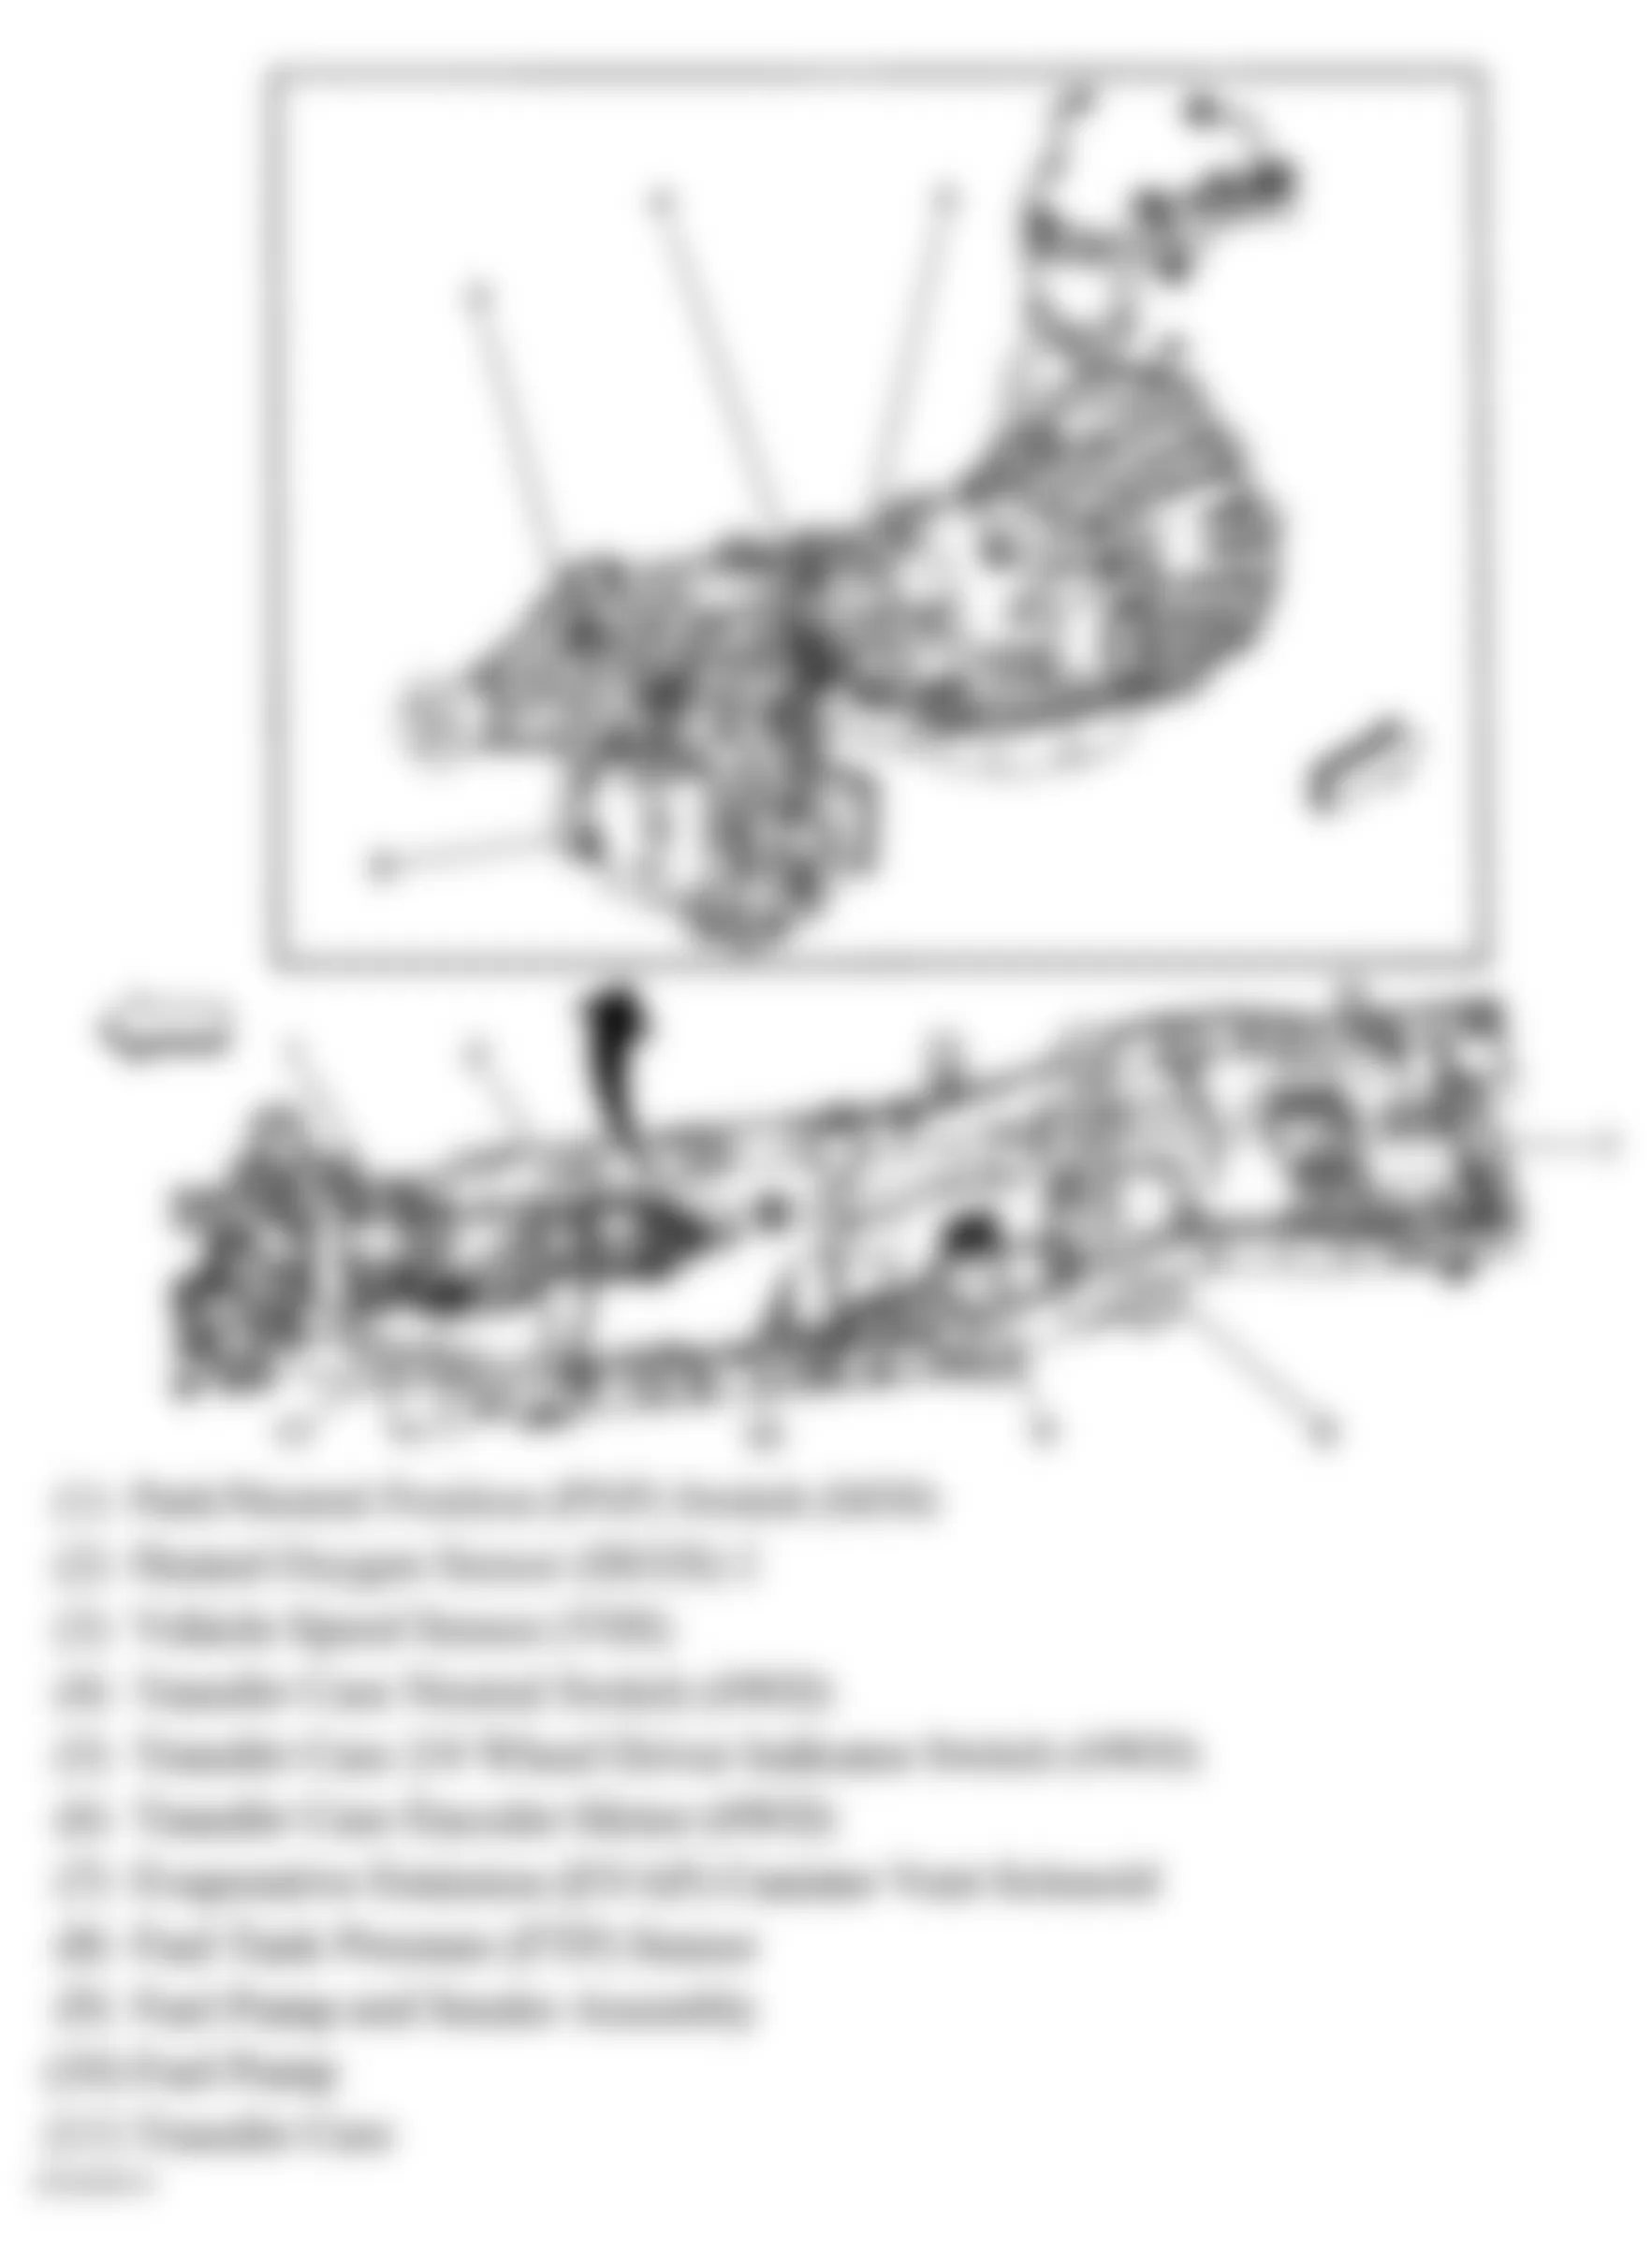 Isuzu i-290 S 2008 - Component Locations -  Chassis & Right Side Of Transfer Case